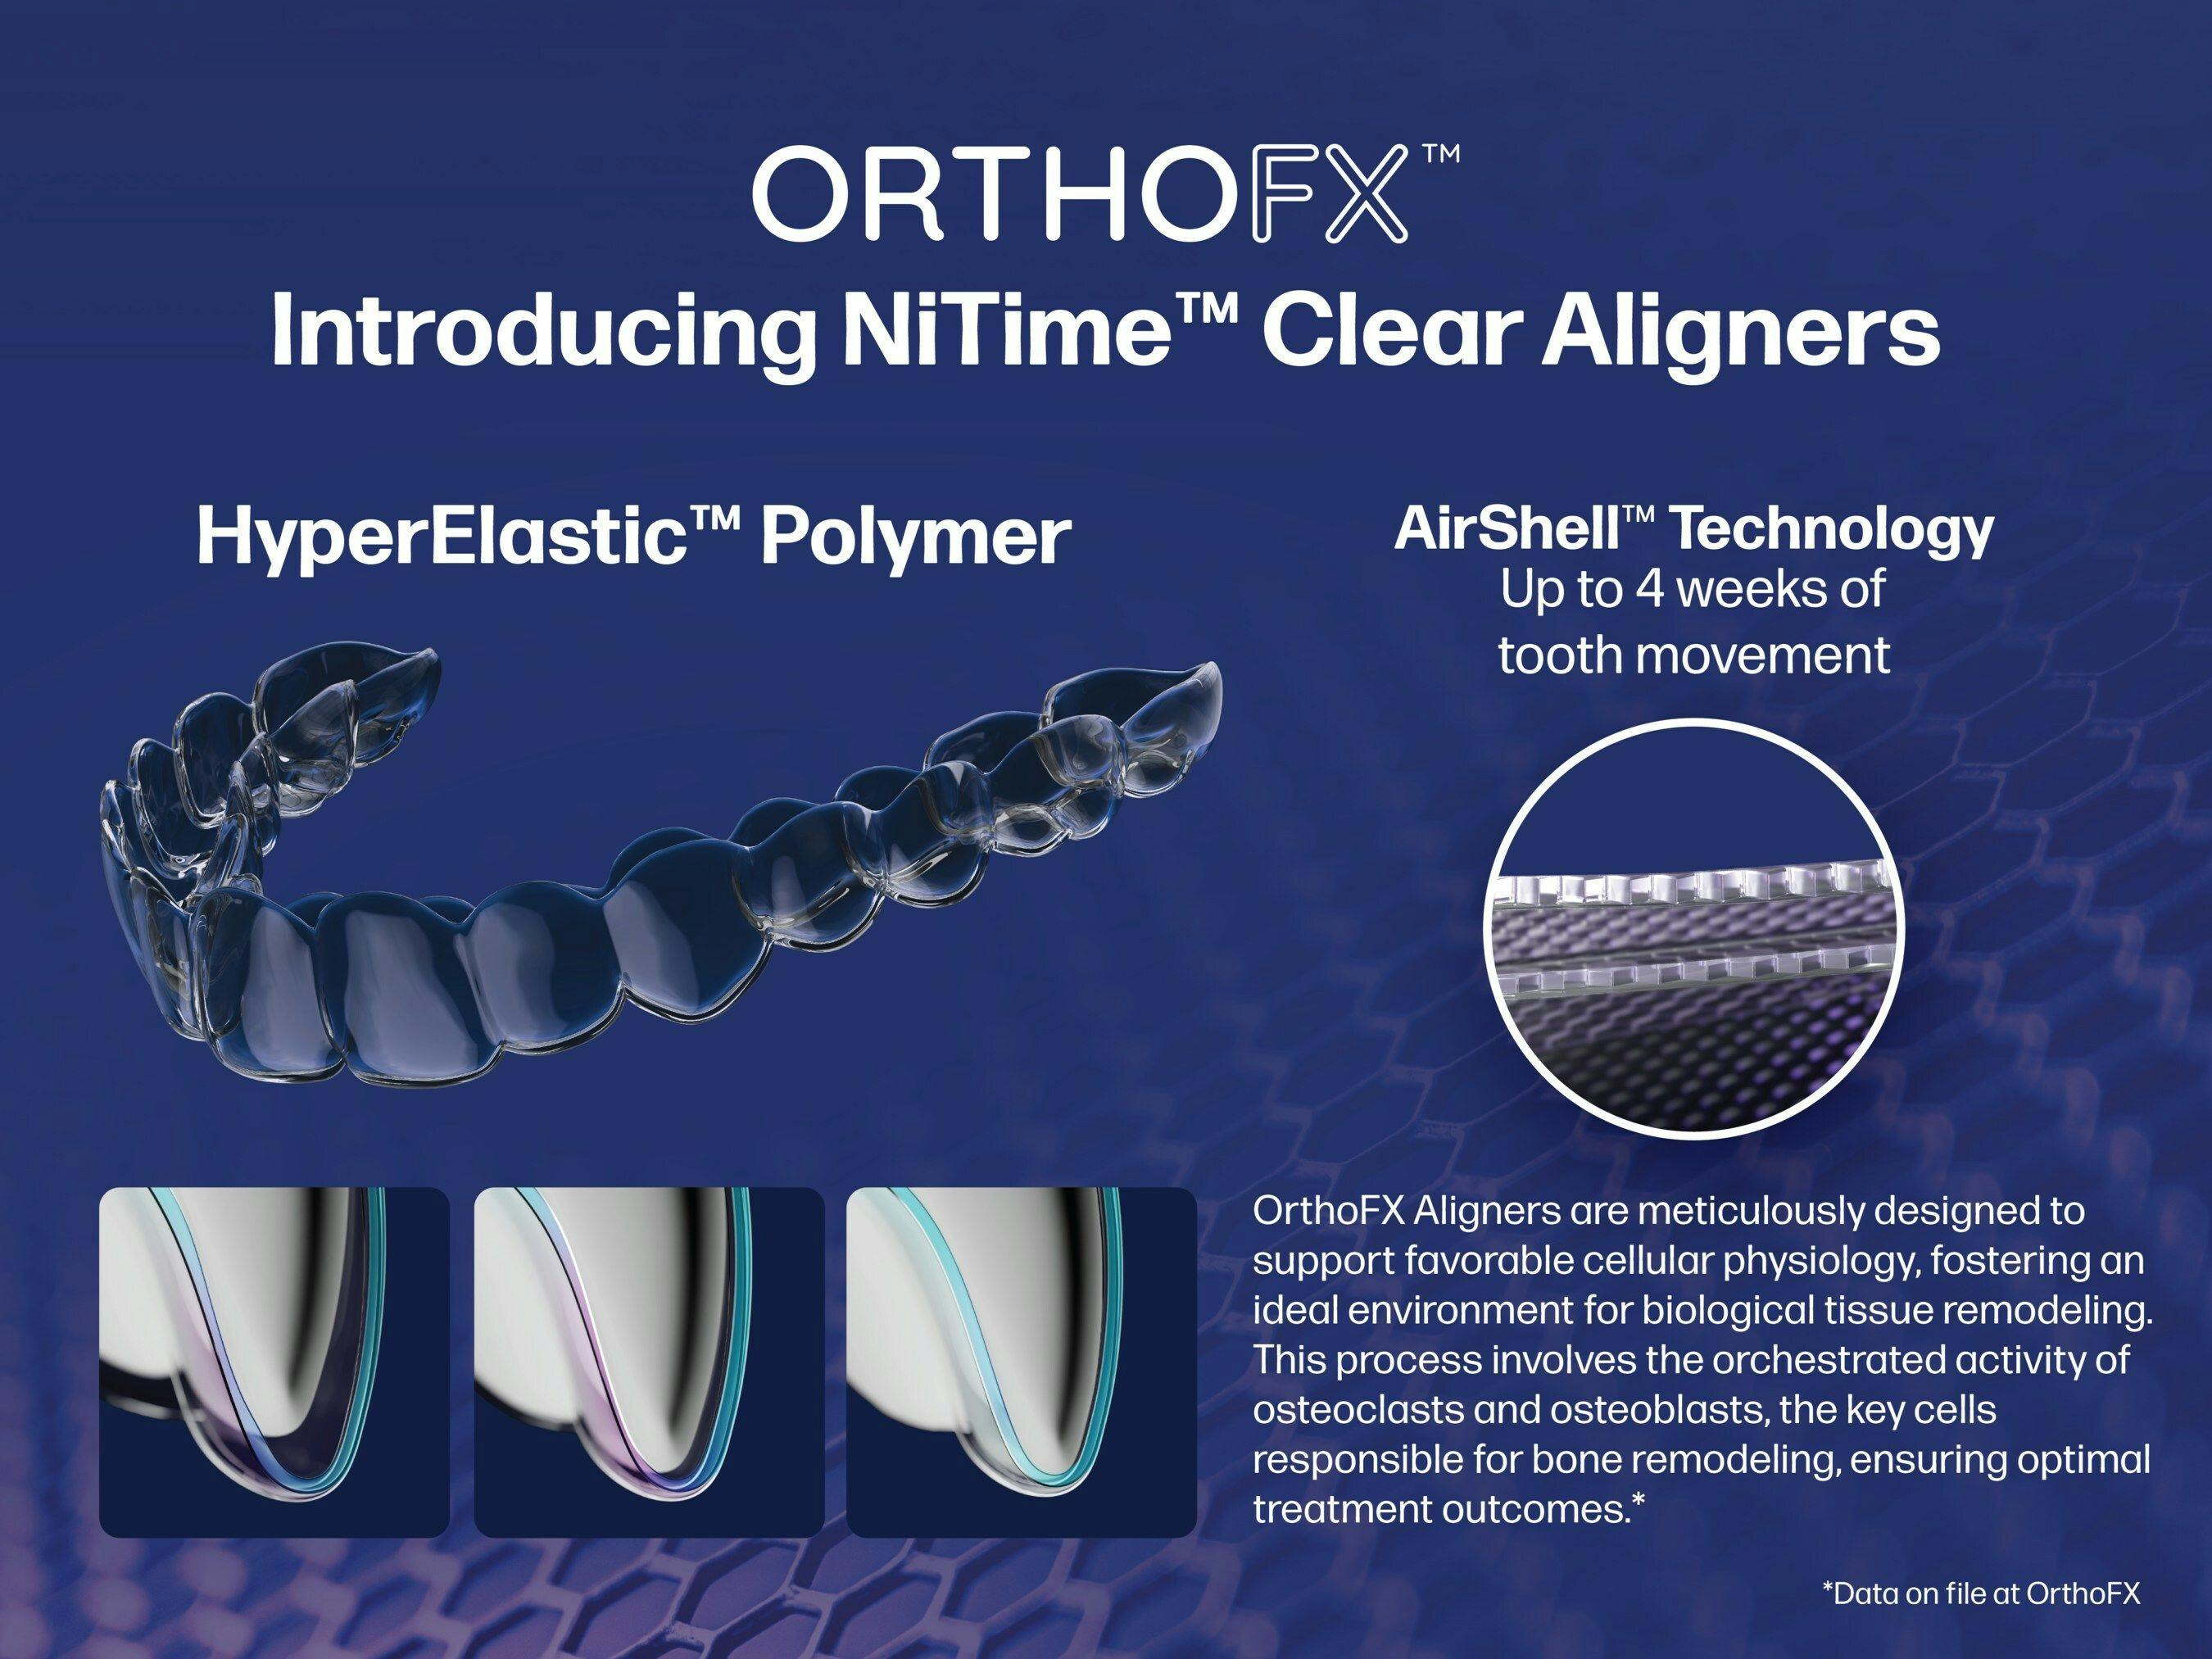 OrthoFX™ Aims to Enhance Orthodontic Treatment with NiTime™ Clear Aligners. Image credit: © OrthoFx